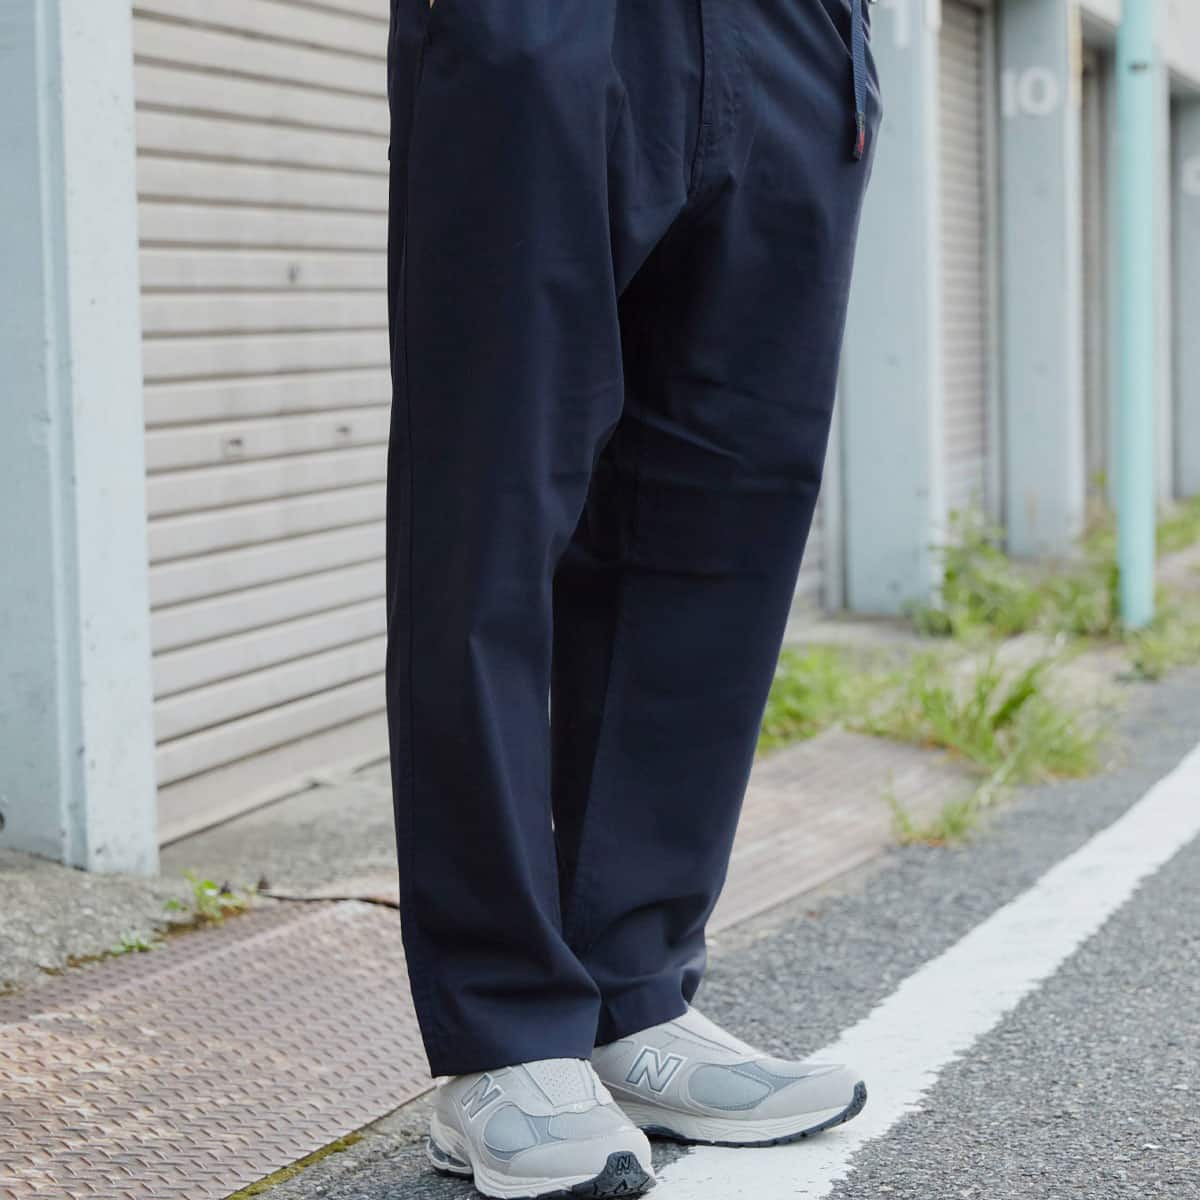 WHITE MOUNTAINEERING × GRAMICCI TECH WOOLLY TAPERED PANTS NAVY 22SP-I